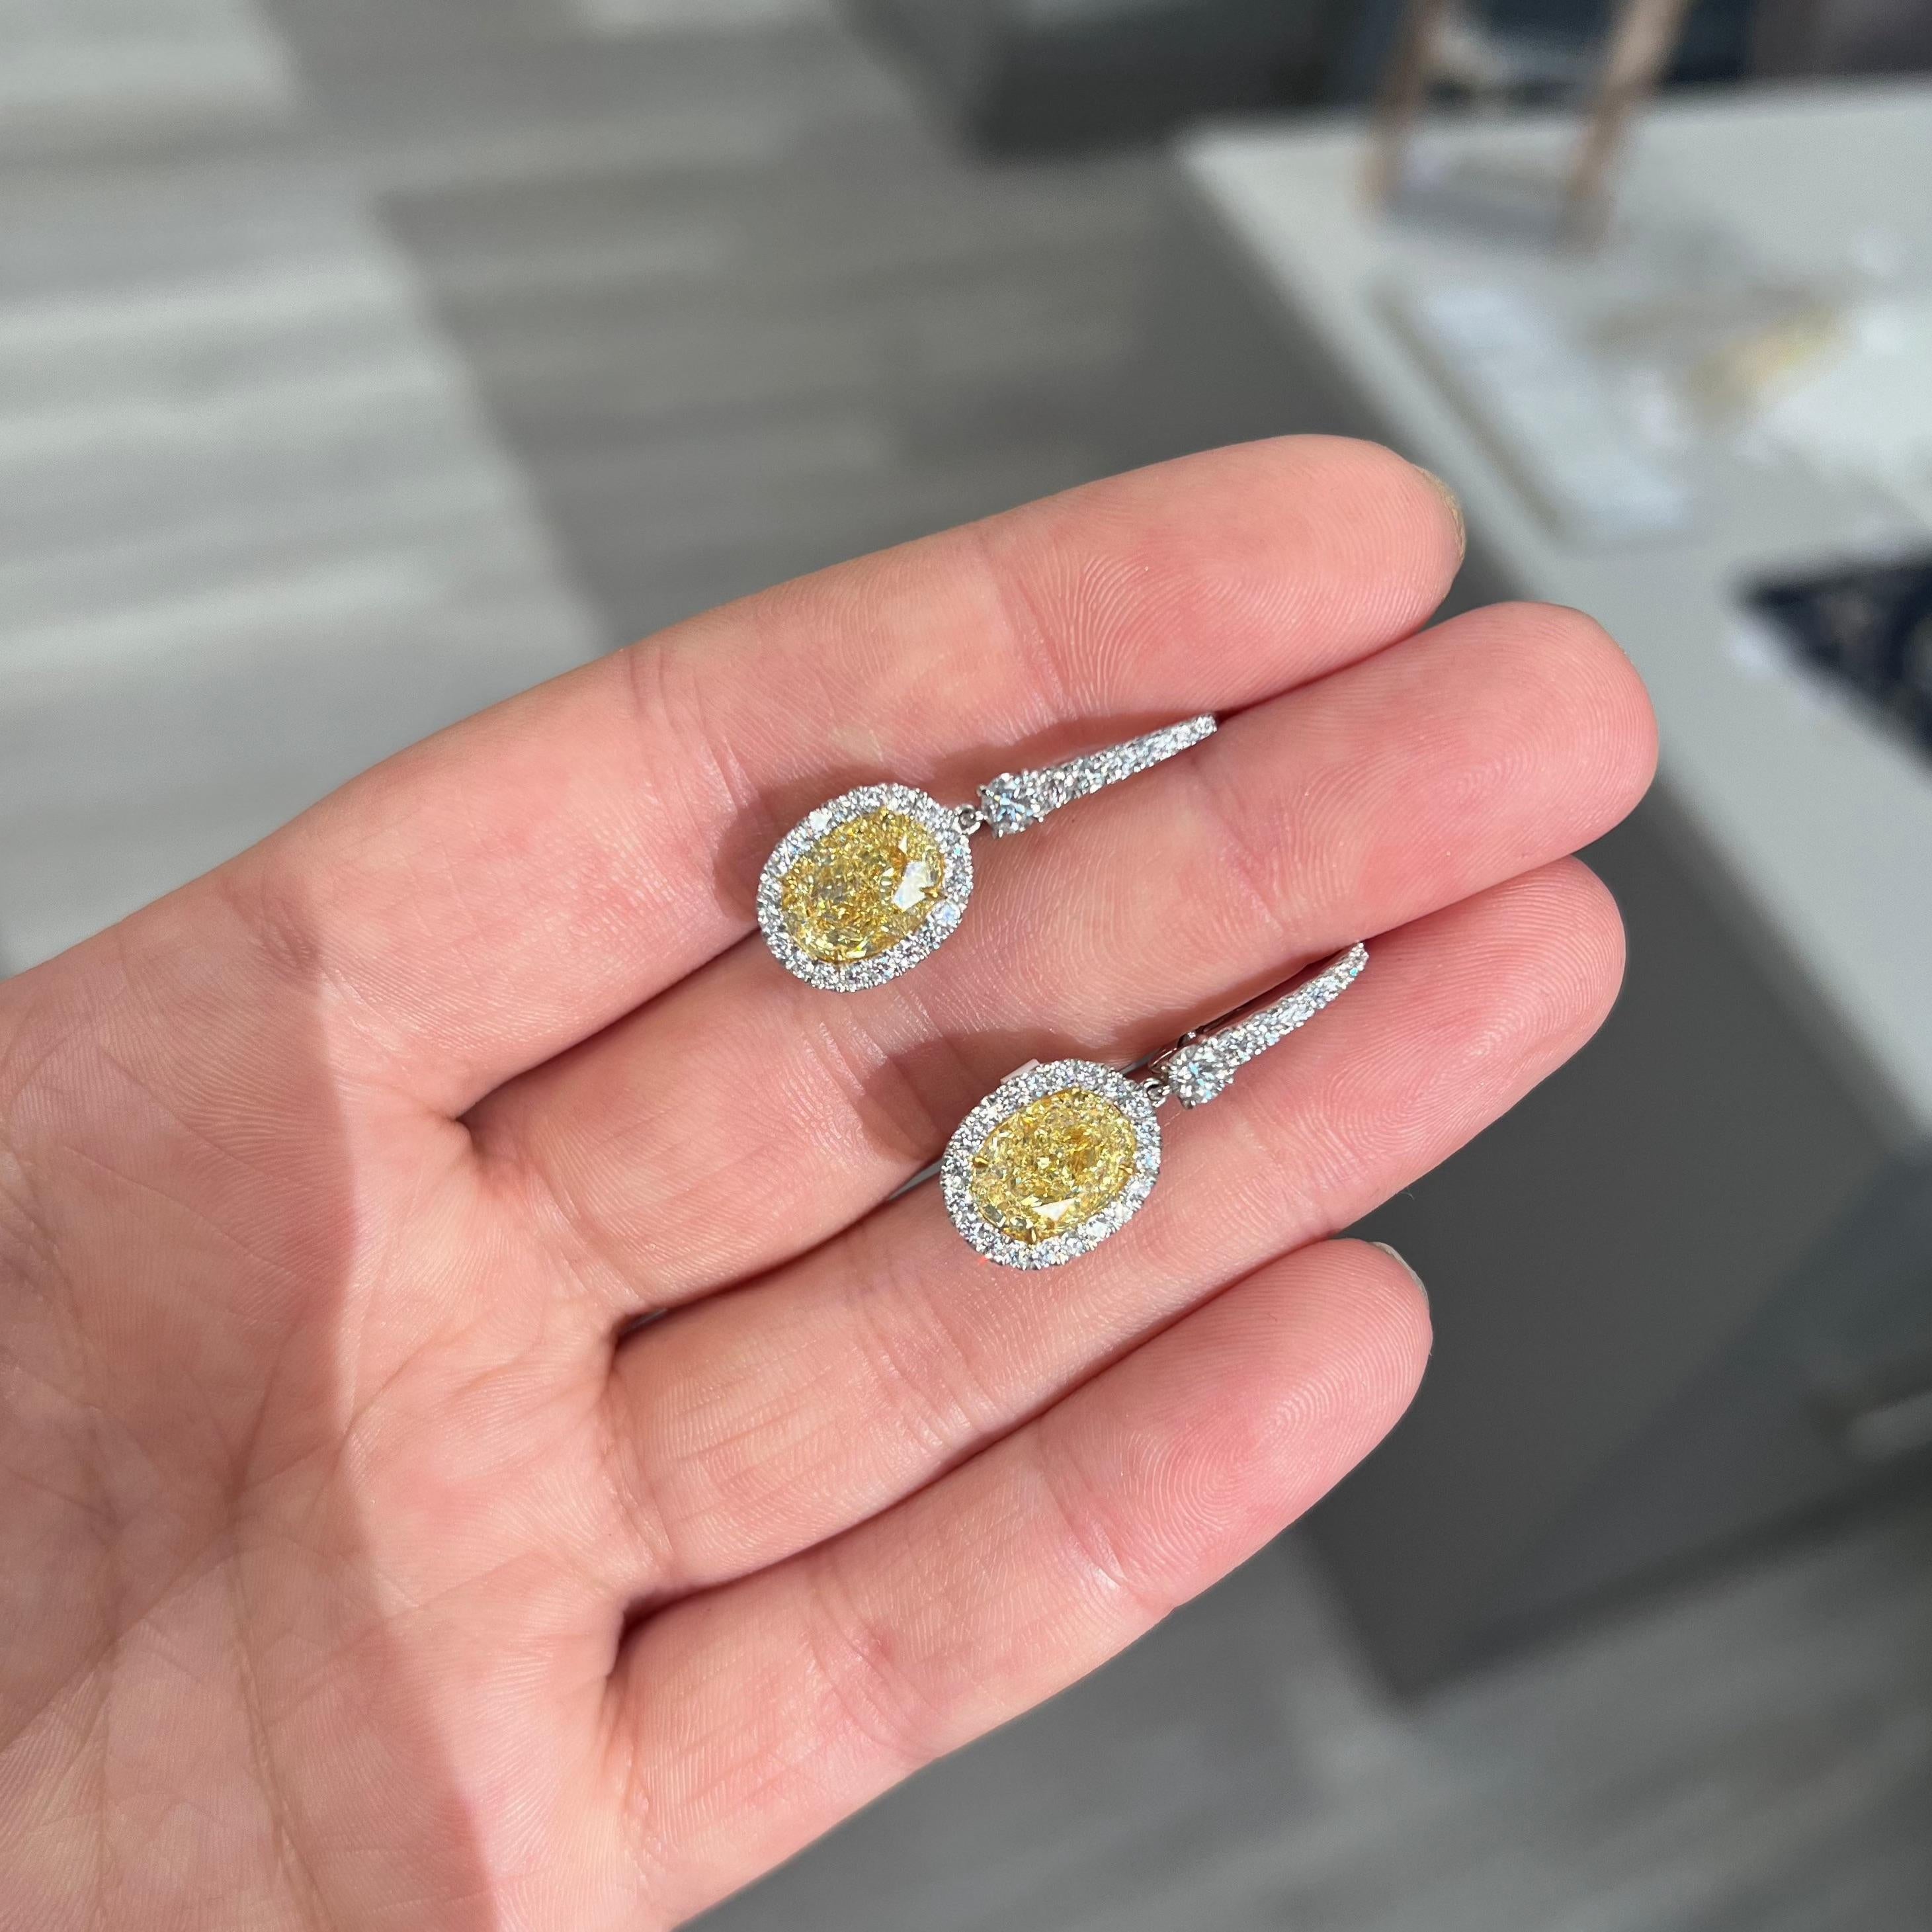 Drop dead gorgeous earrings with 3ct each GIA certified Fancy Light Yellow Ovals bursting with fire and life
Strong lemon yellow color, no bow tie- color filling the entirety of the stones
Set in Platinum and 18kt Yellow Gold with 1.09ct of white